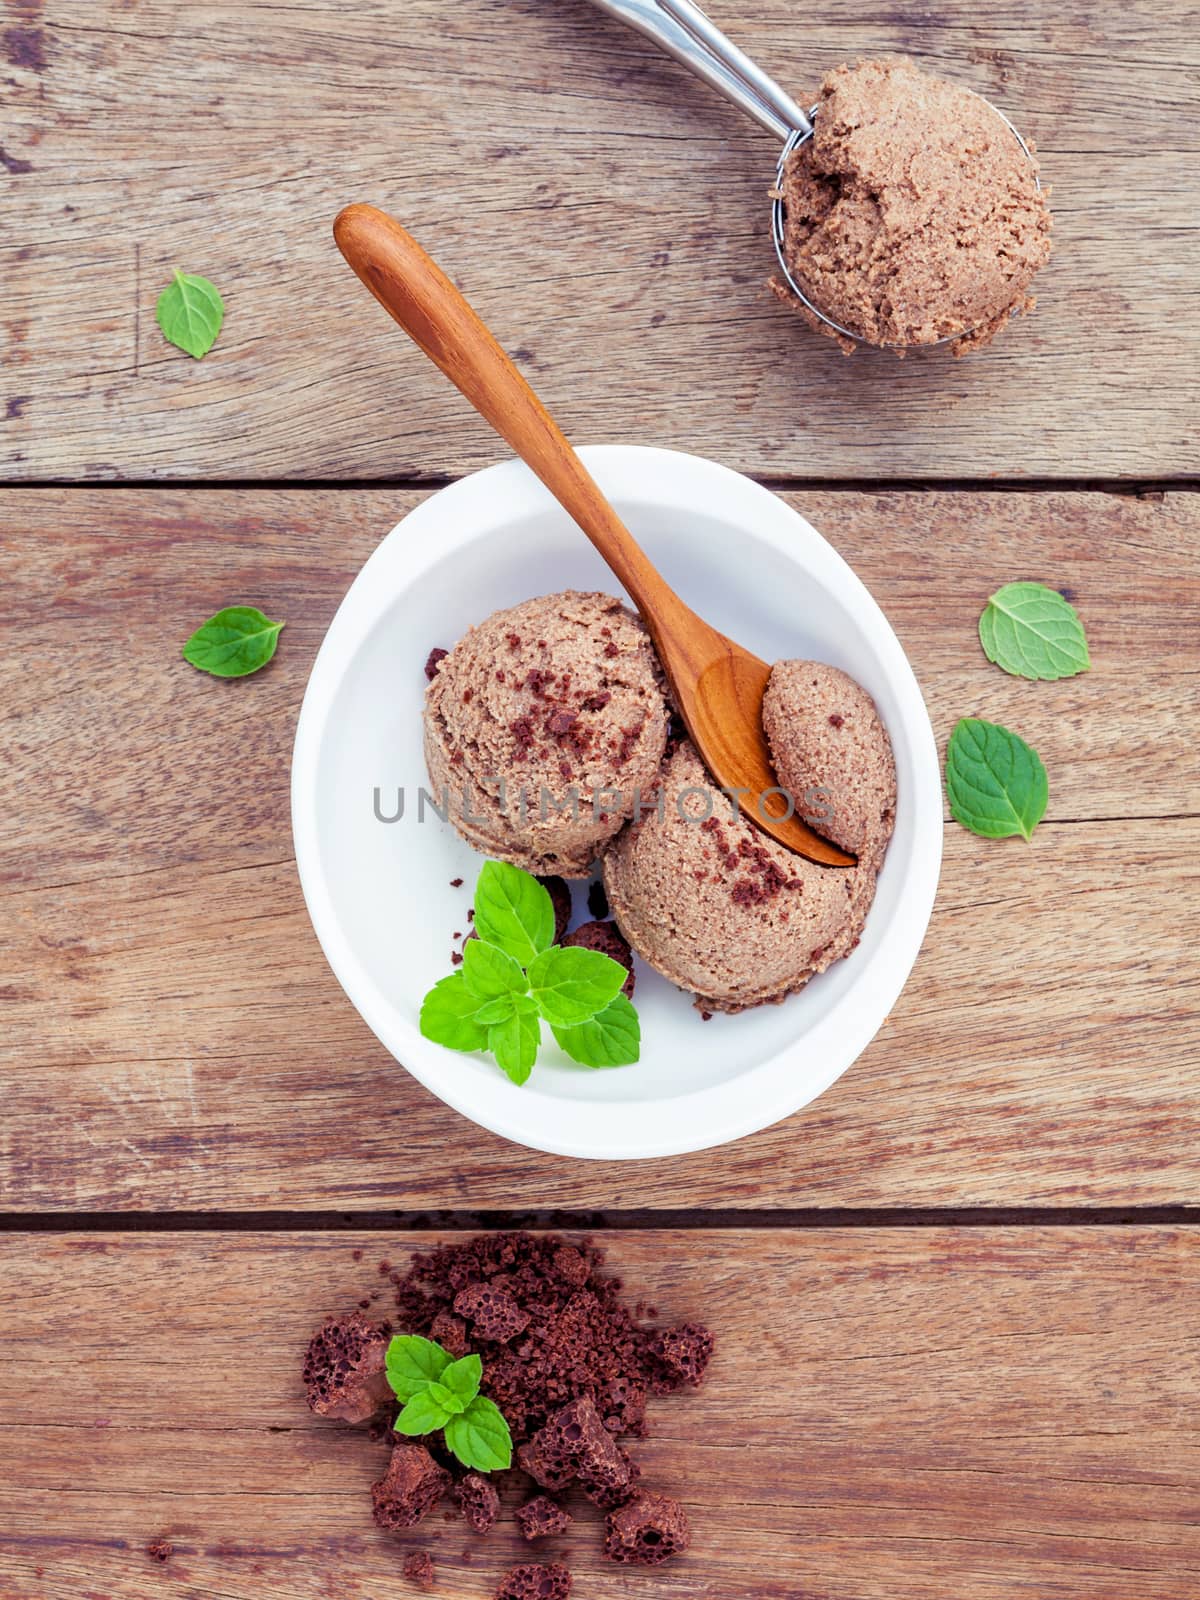 Chocolate ice cream in white bowl with fresh peppermint leaves a by kerdkanno